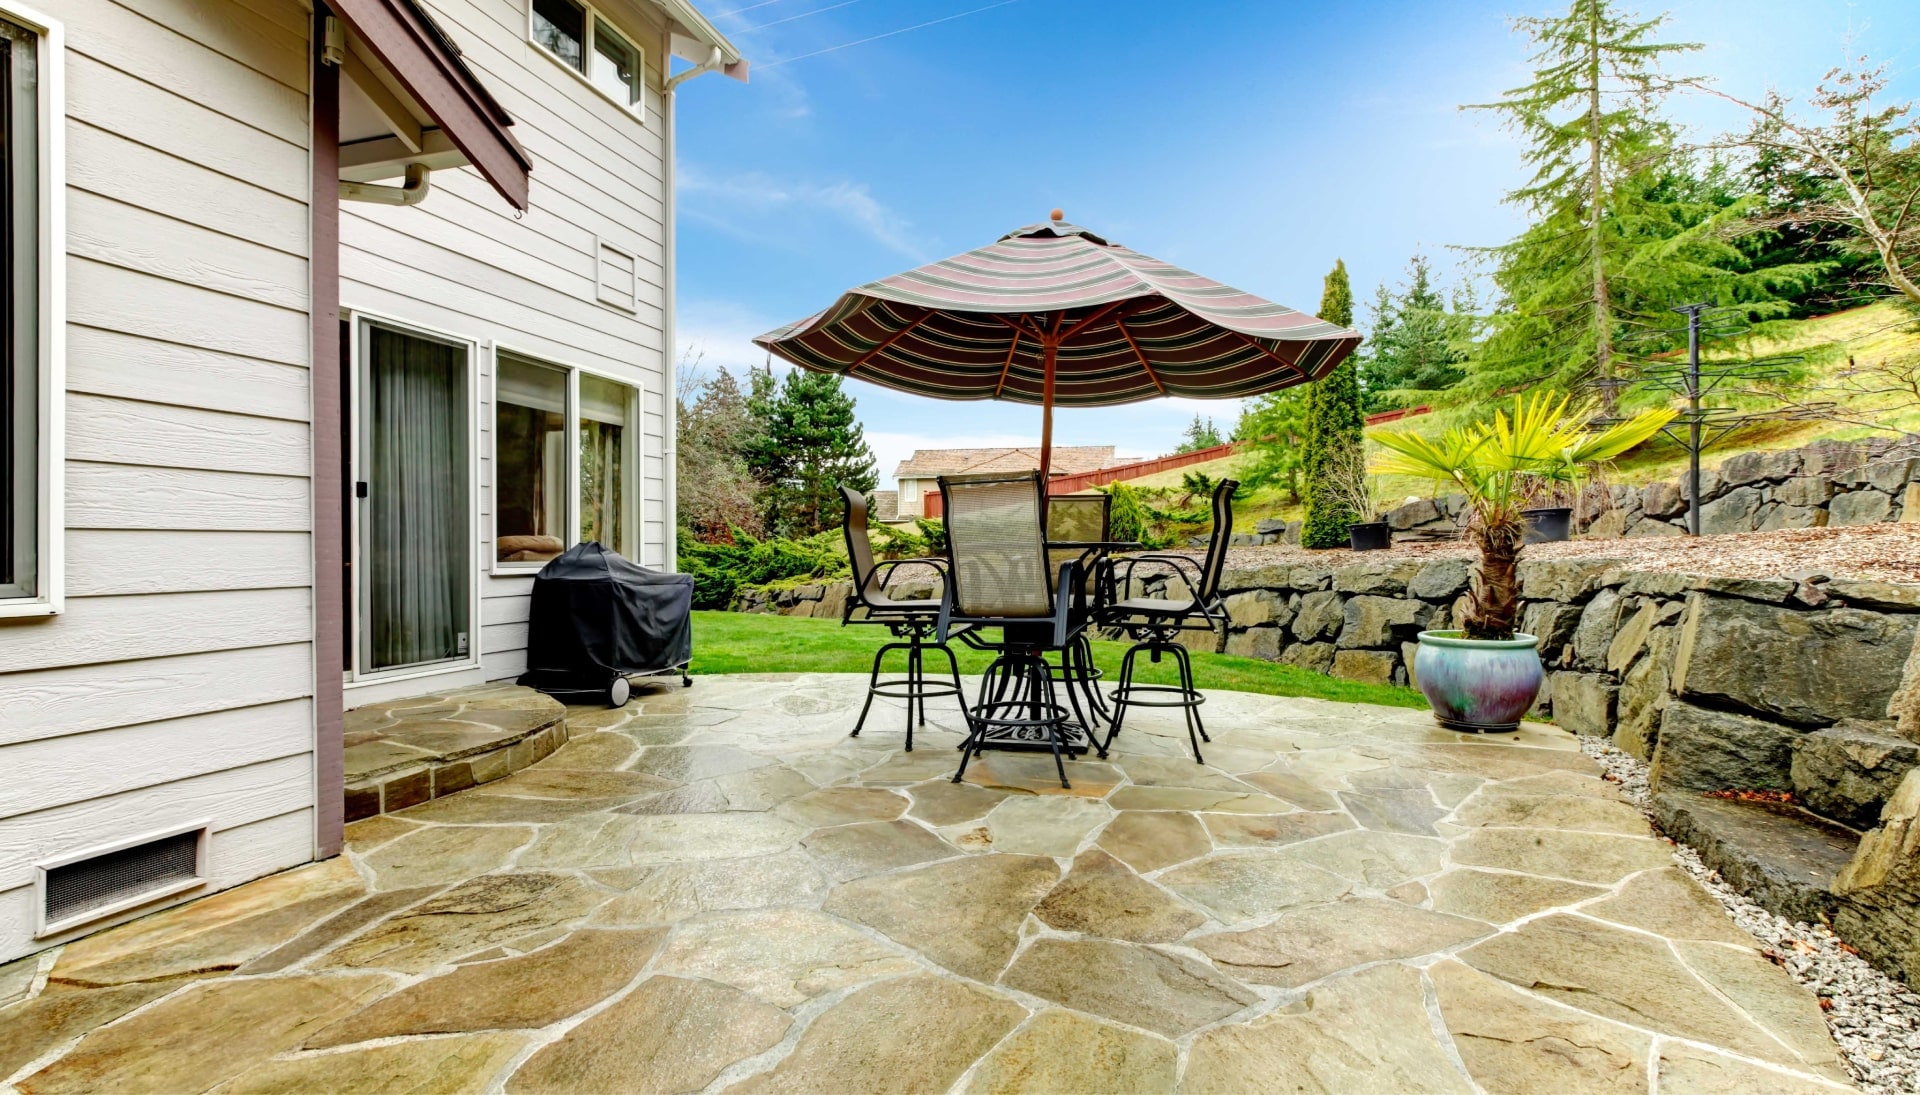 Beautifully Textured and Patterned Concrete Patios in Portland, Oregon area!